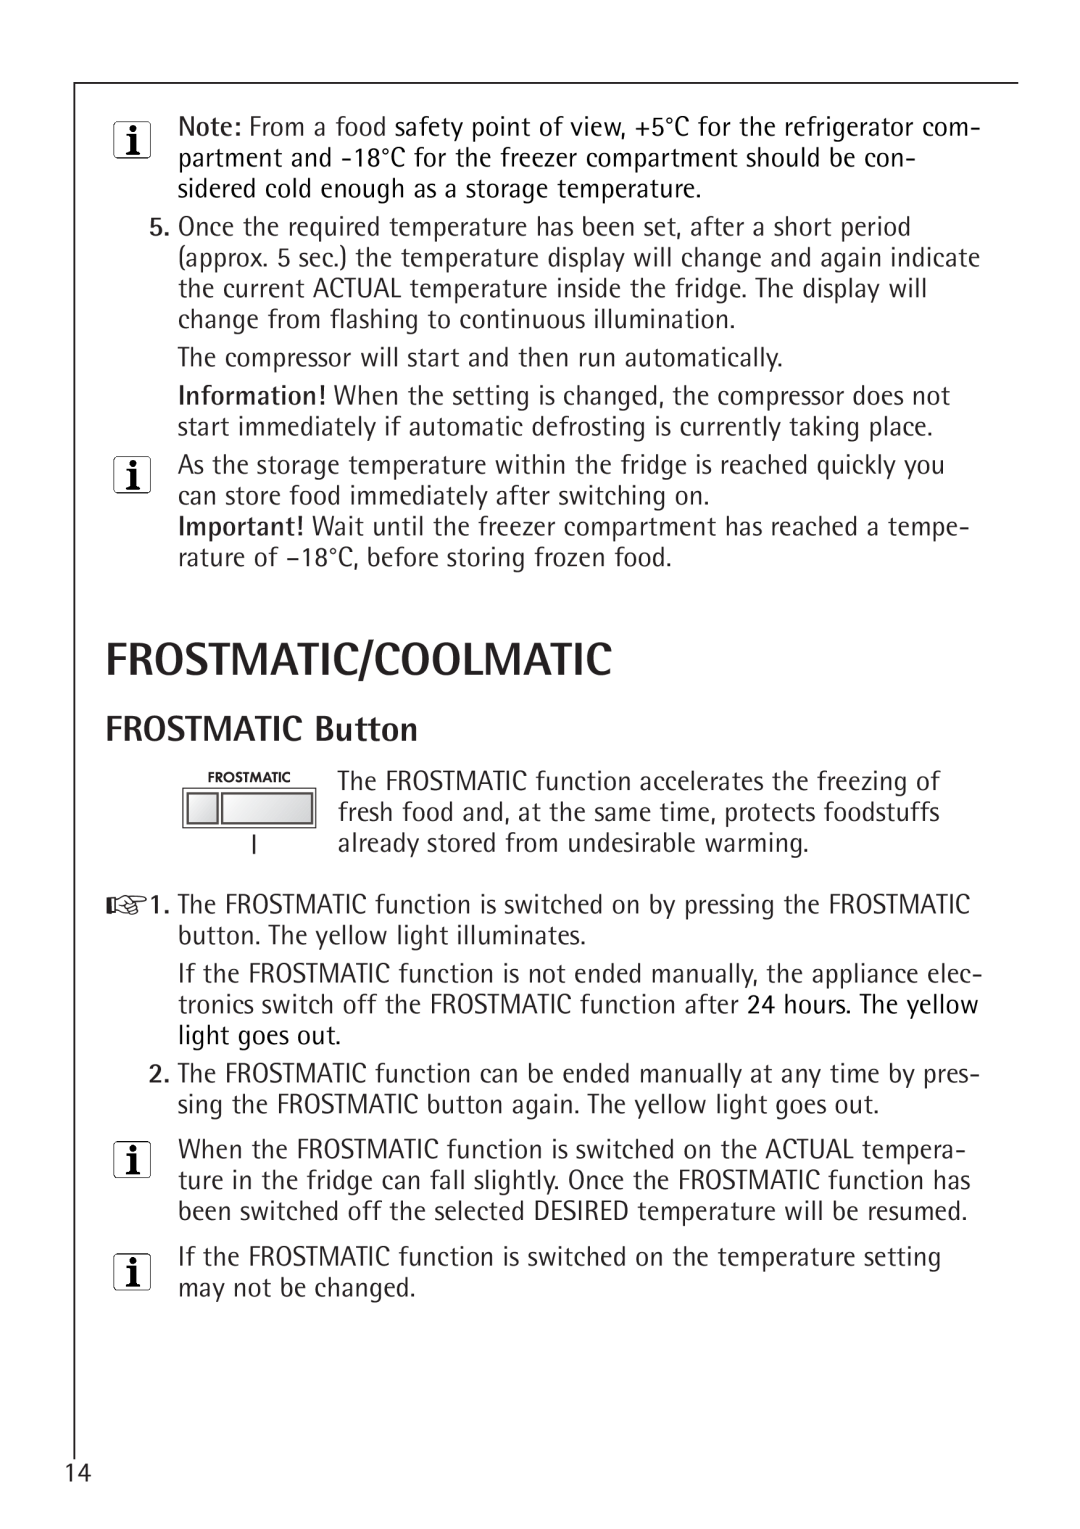 Electrolux 1583-8 TK operating instructions Frostmatic/Coolmatic, FROSTMATIC Button 